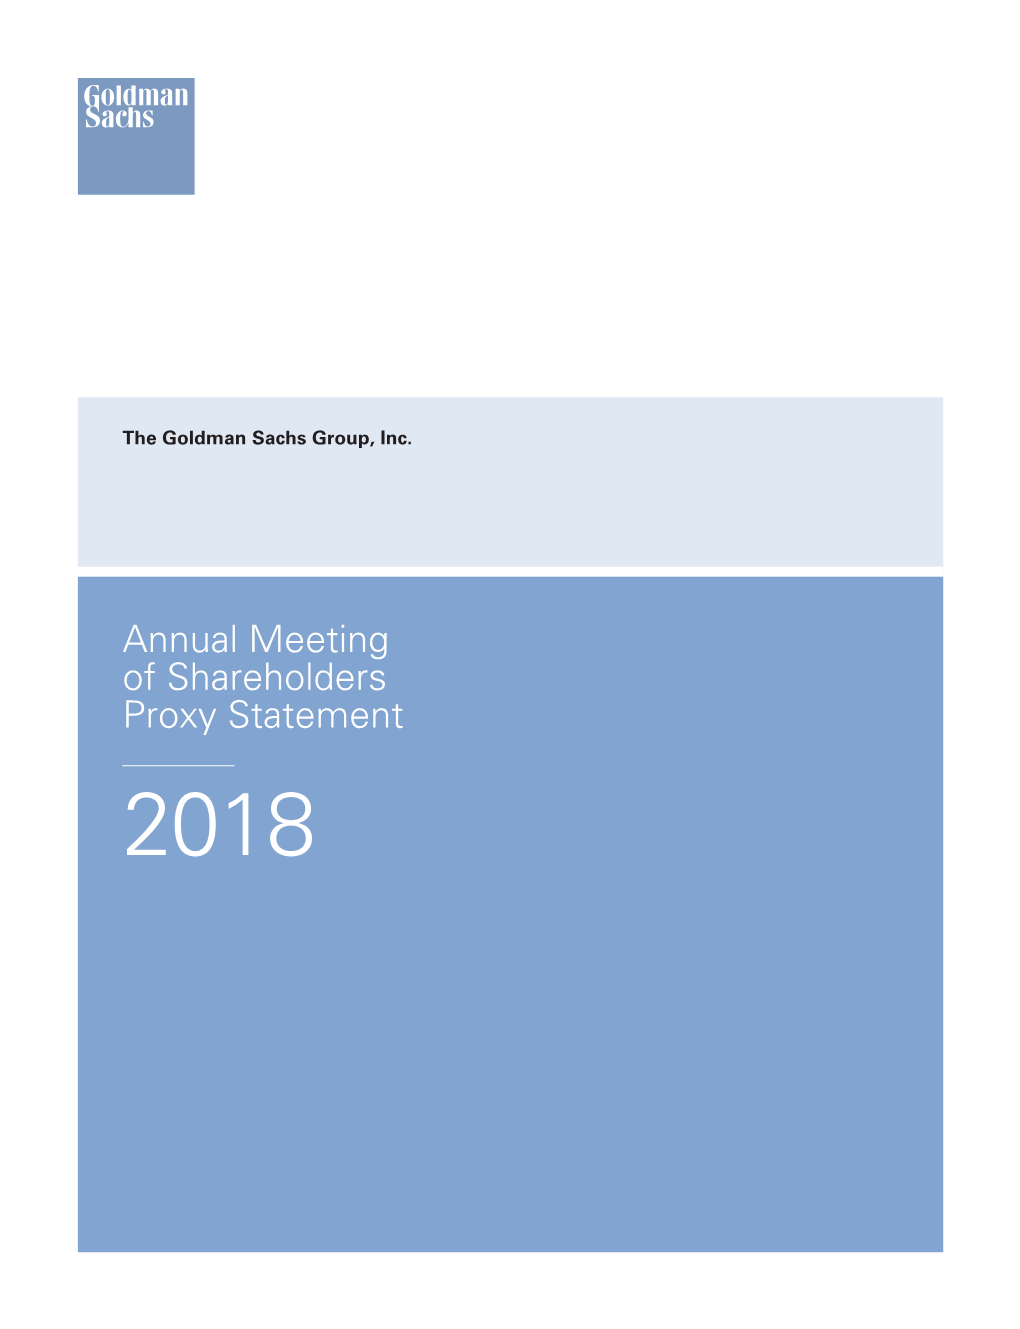 Proxy Statement for 2018 Annual Meeting of Shareholders